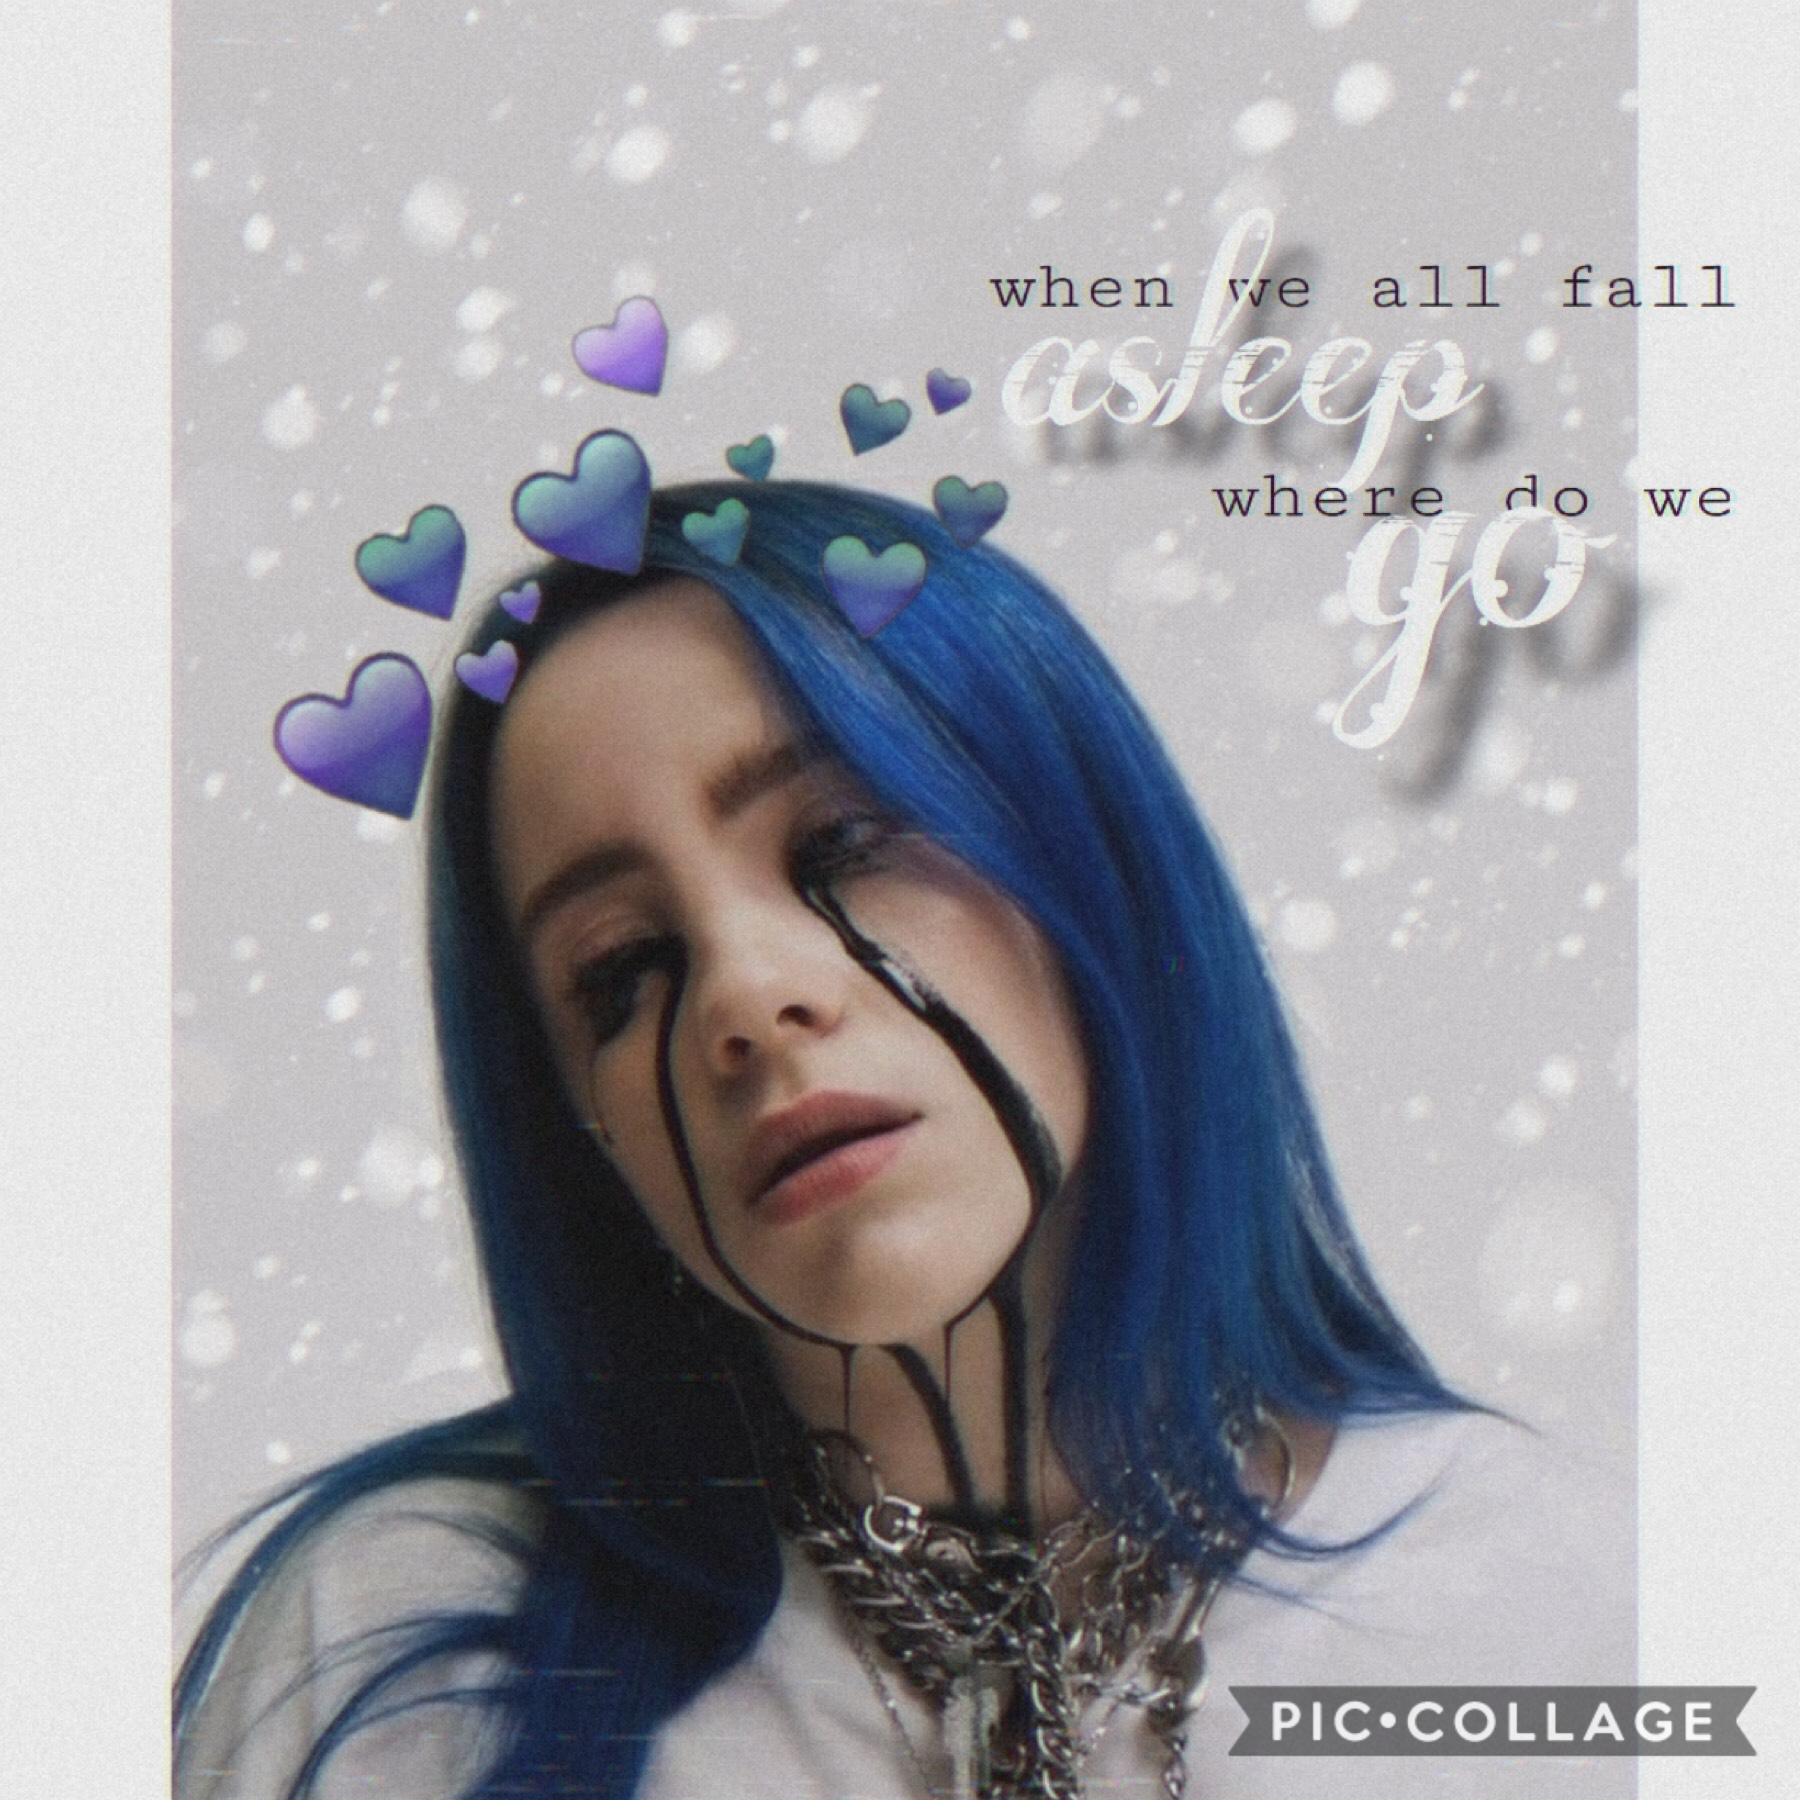 i’m having so much fun. i’ve been working on edits for literally 3 hours now. i’ve listen to the thank u, next album 3 times and now. i’m-
background/stickers/text/filters: PicsArt
lyrics: bury a friend - billie eilish 